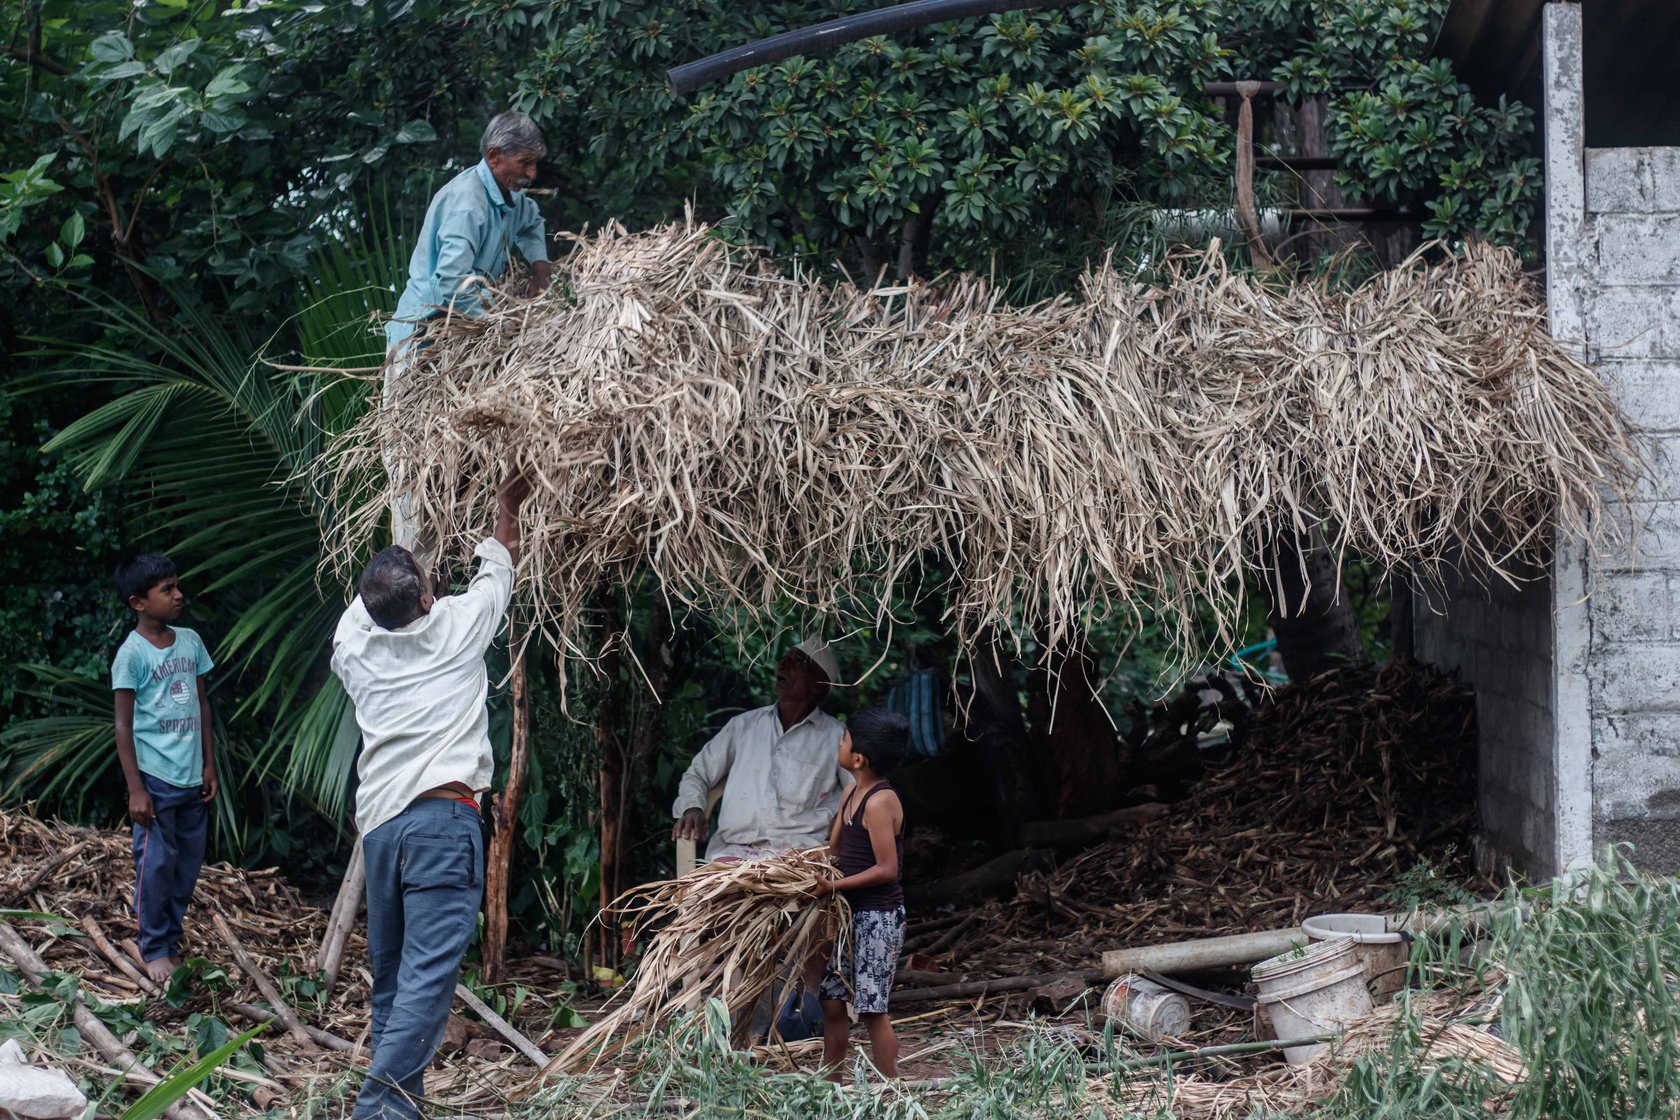 Ashok Bhosale passing the dried sugarcane tops to Vishnu Bhosale. An important food for cattle, sugarcane tops are waterproof and critical for thatching